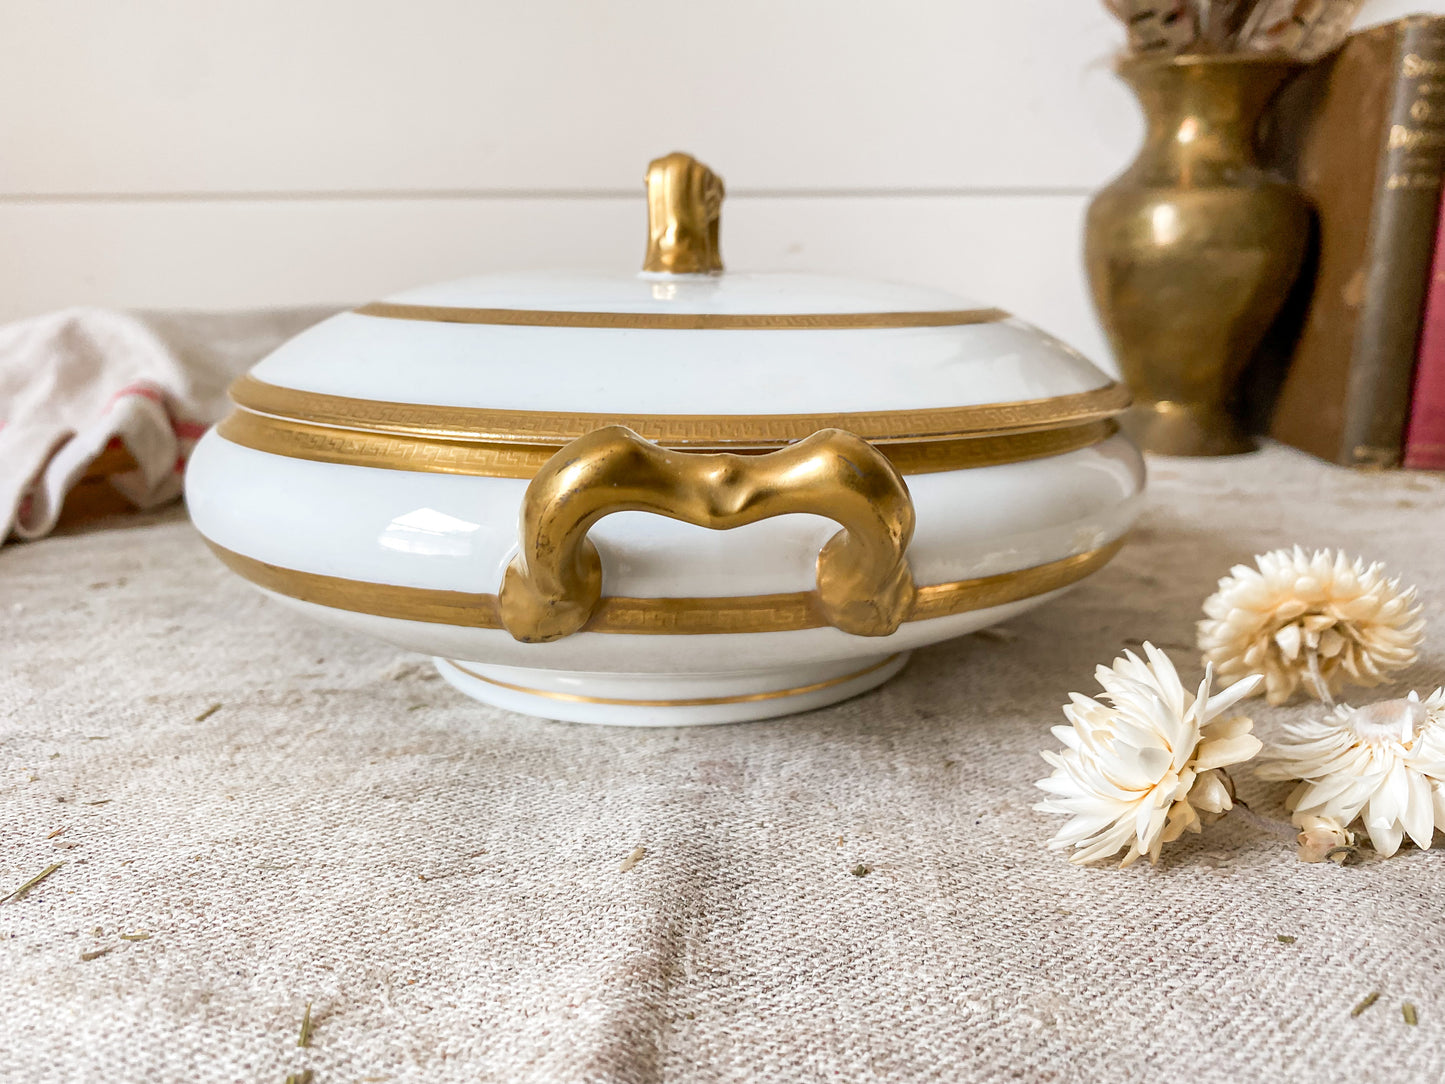 Vintage White French Porcelain Round Serving Dish with Gold Trim | D & C France